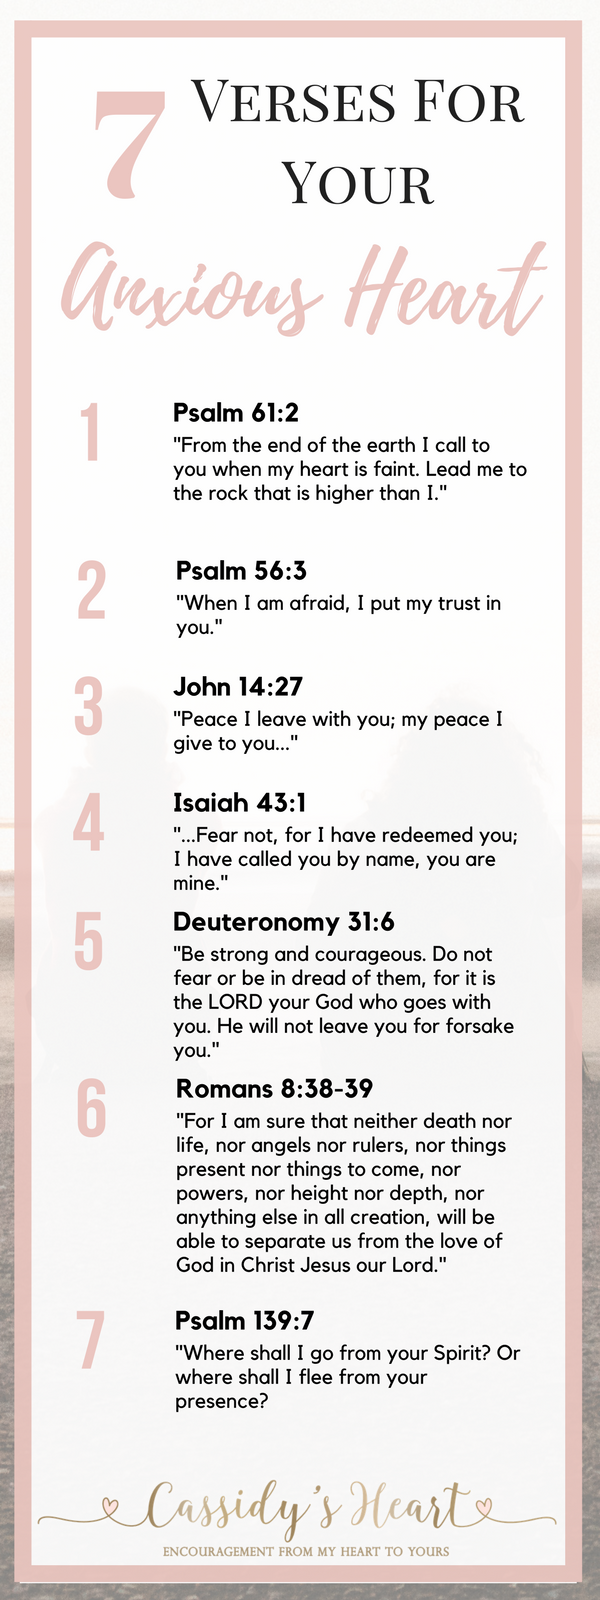 7 Verses For Your Anxious Heart